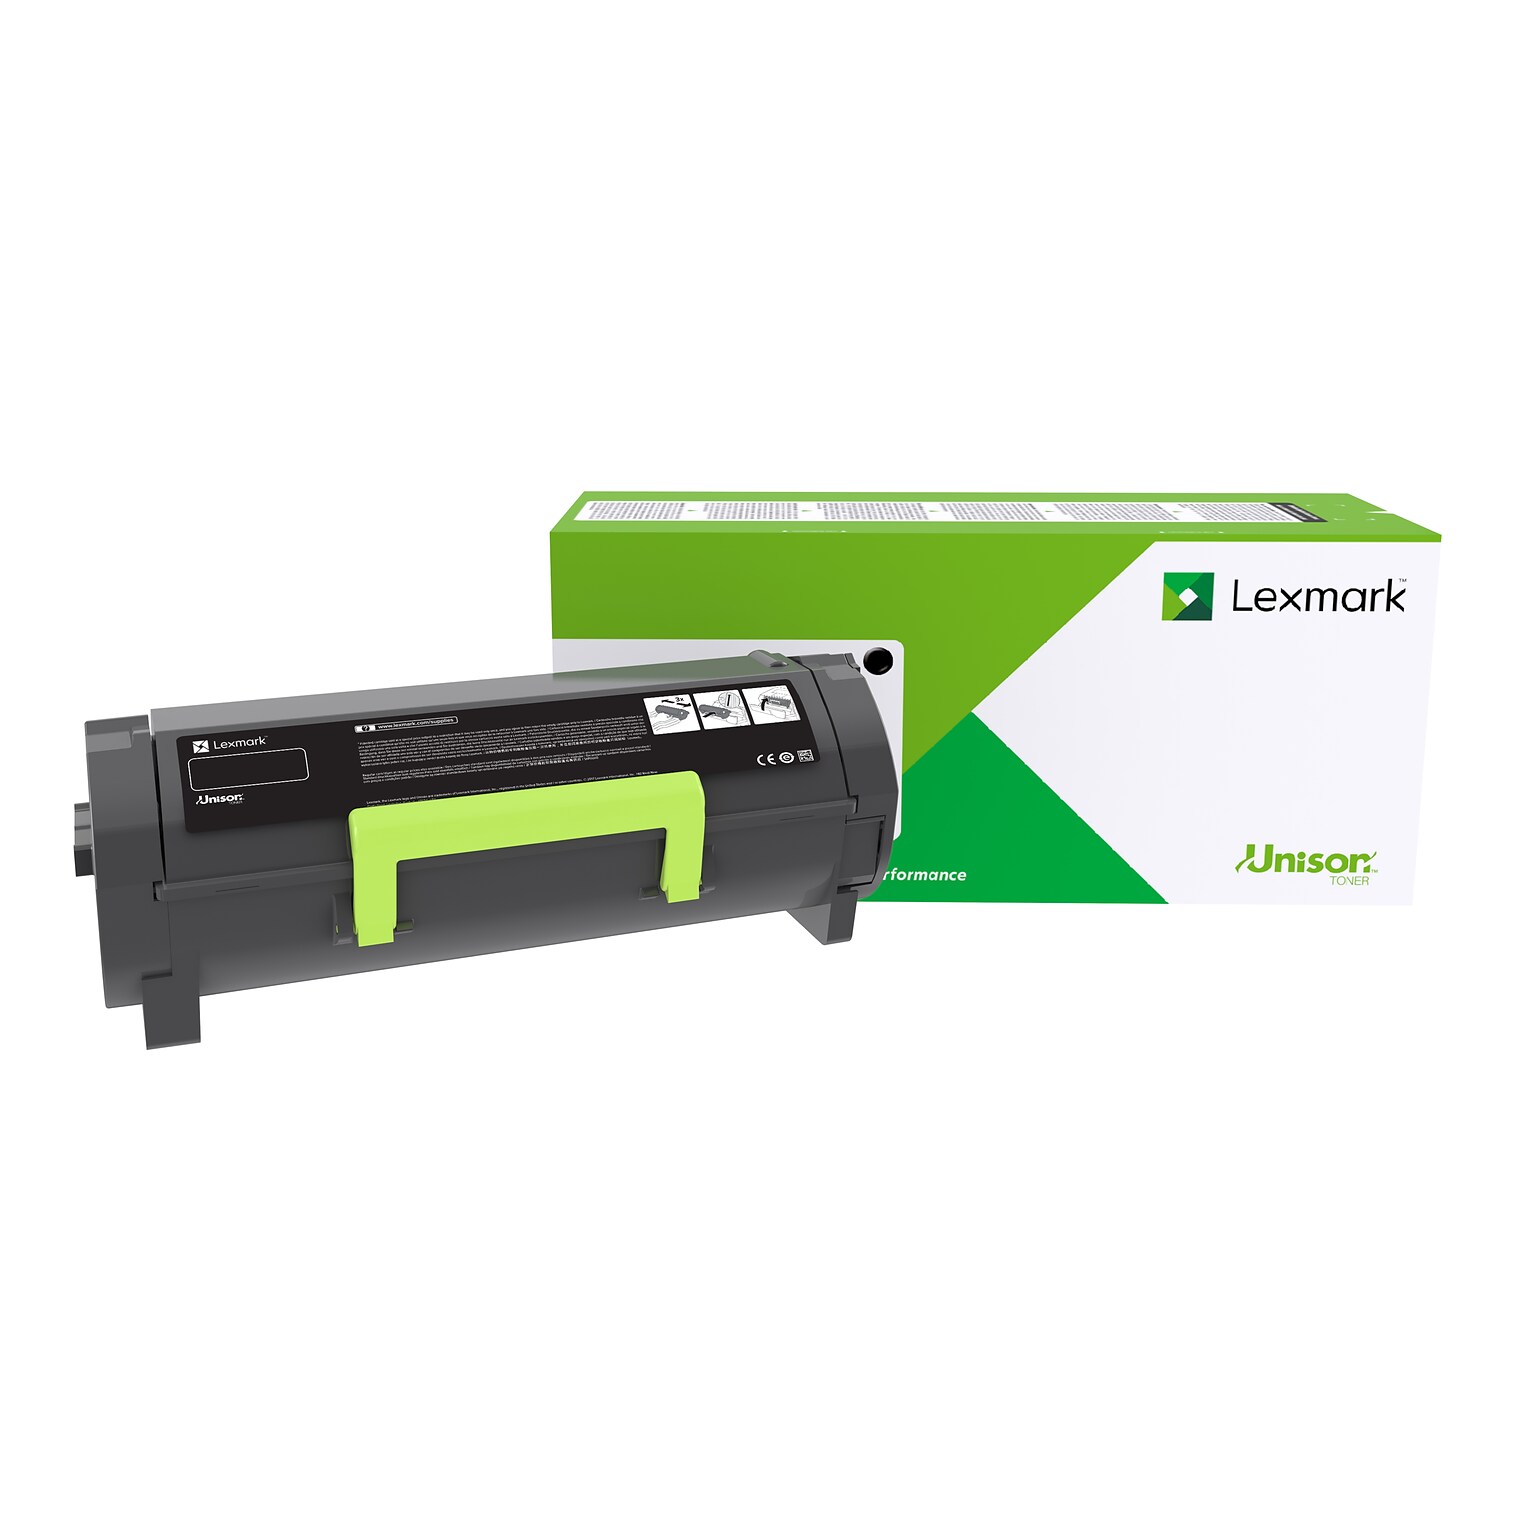 Lexmark 56 Black High Yield Toner Cartridge, Prints Up to 20,000 Pages (56F1X0E)